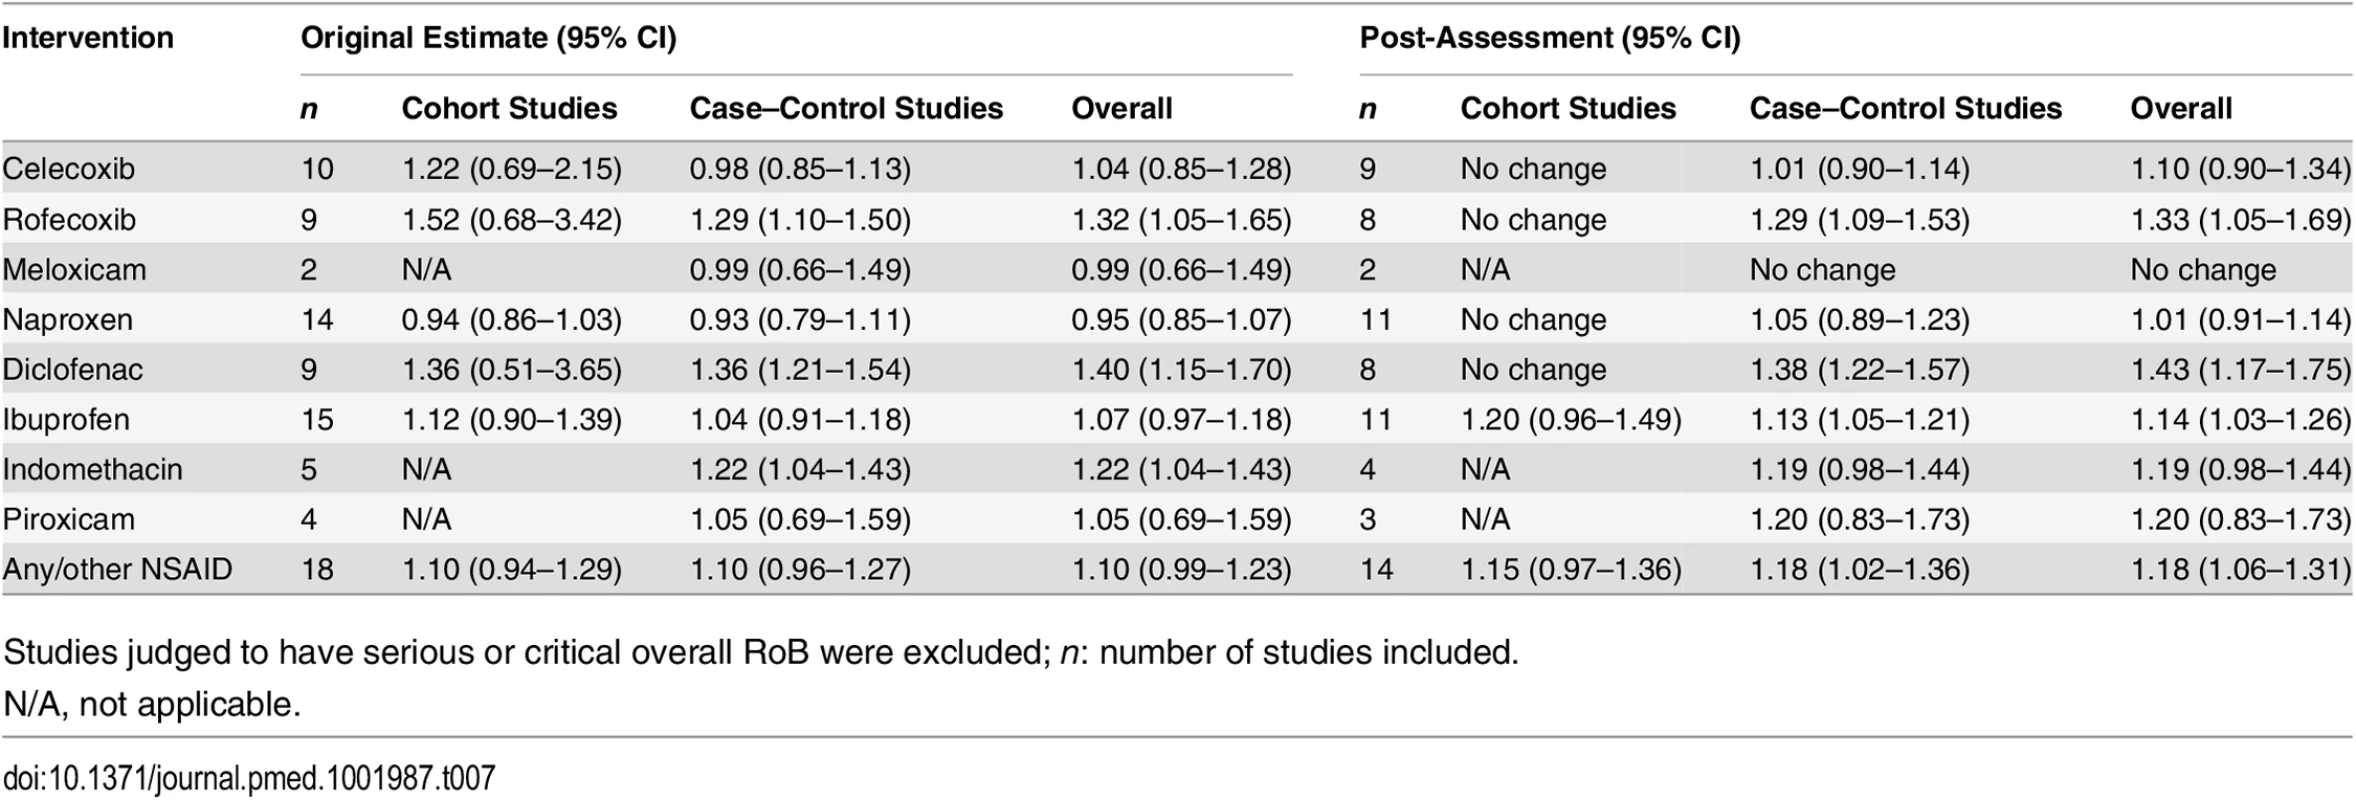 Risk estimates from meta-analyses: comparison of original estimates with post-assessment estimates for the systematic review by McGettigan and Henry [<em class=&quot;ref&quot;>18</em>].